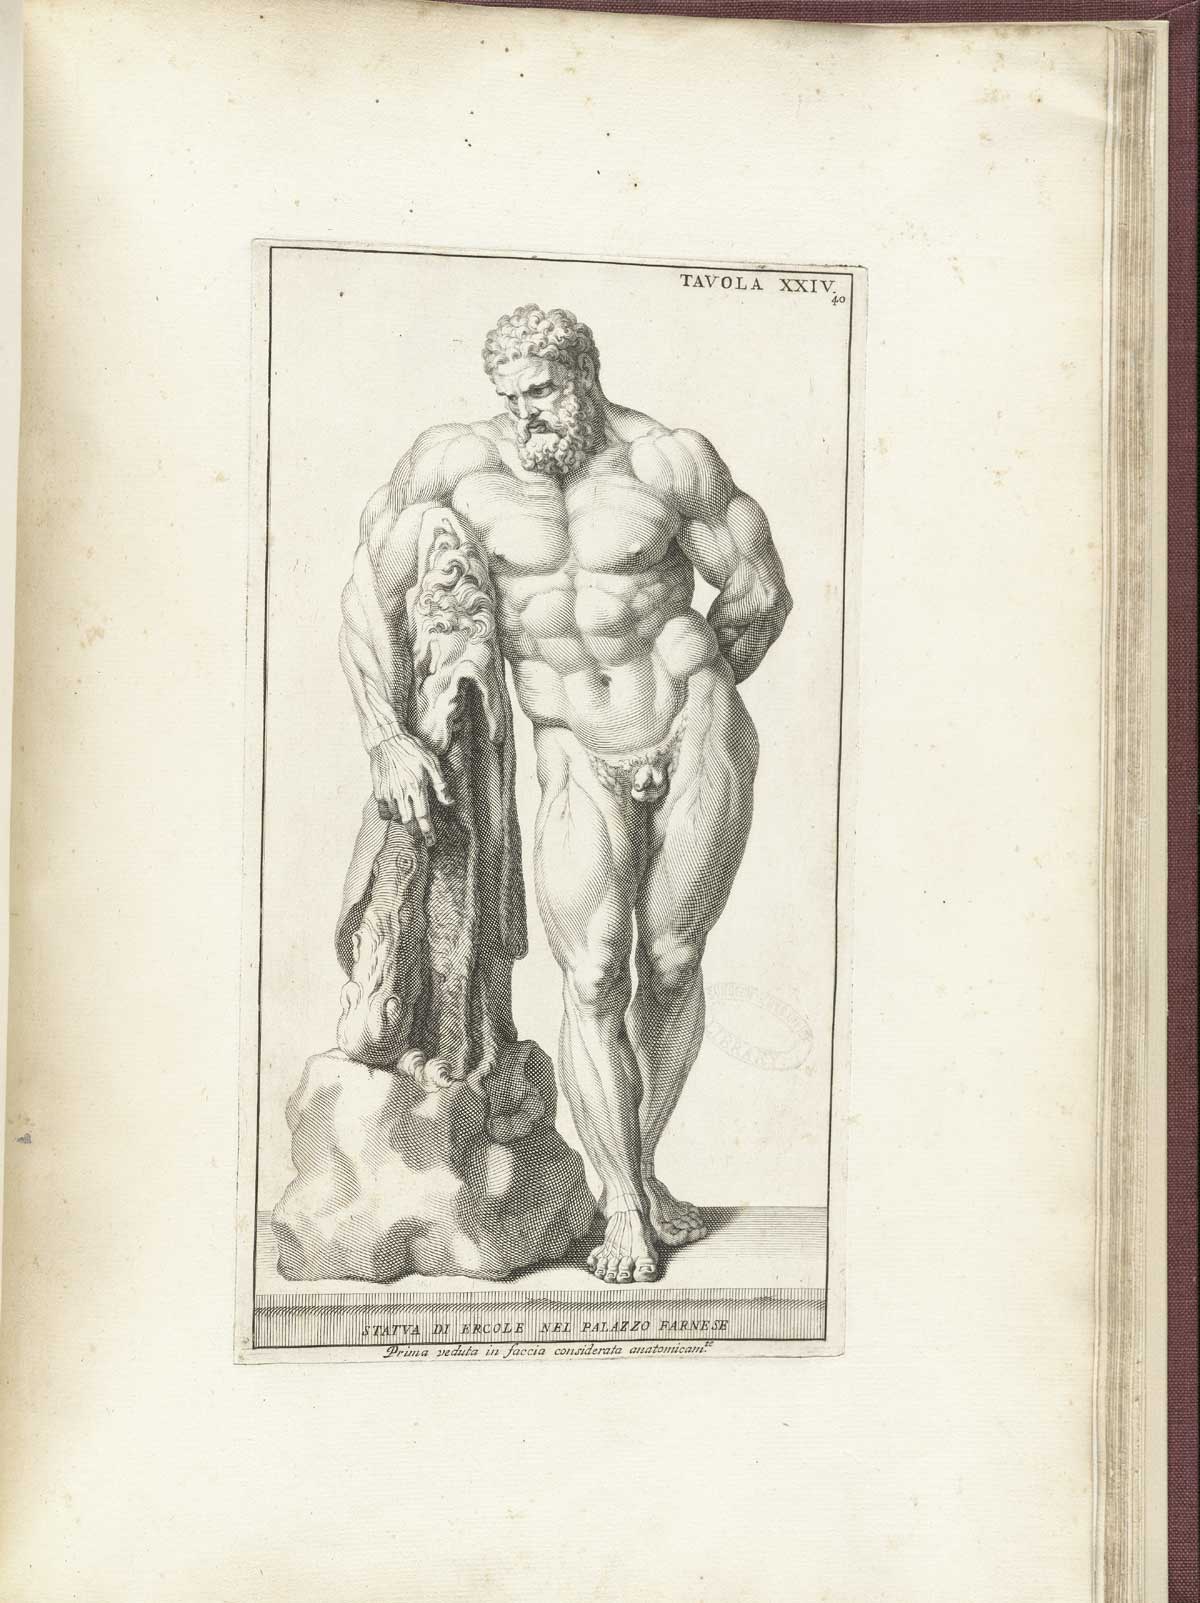 Engraving of the side view of the Farnese Hercules, a statue of a nude Hercules standing leaning with his left shoulder against his club with a lion’s skin over it; from Bernardino Genga’s Anatomia per uso et intelligenza del disegno, NLM Call no.: WZ 250 G329an 1691.